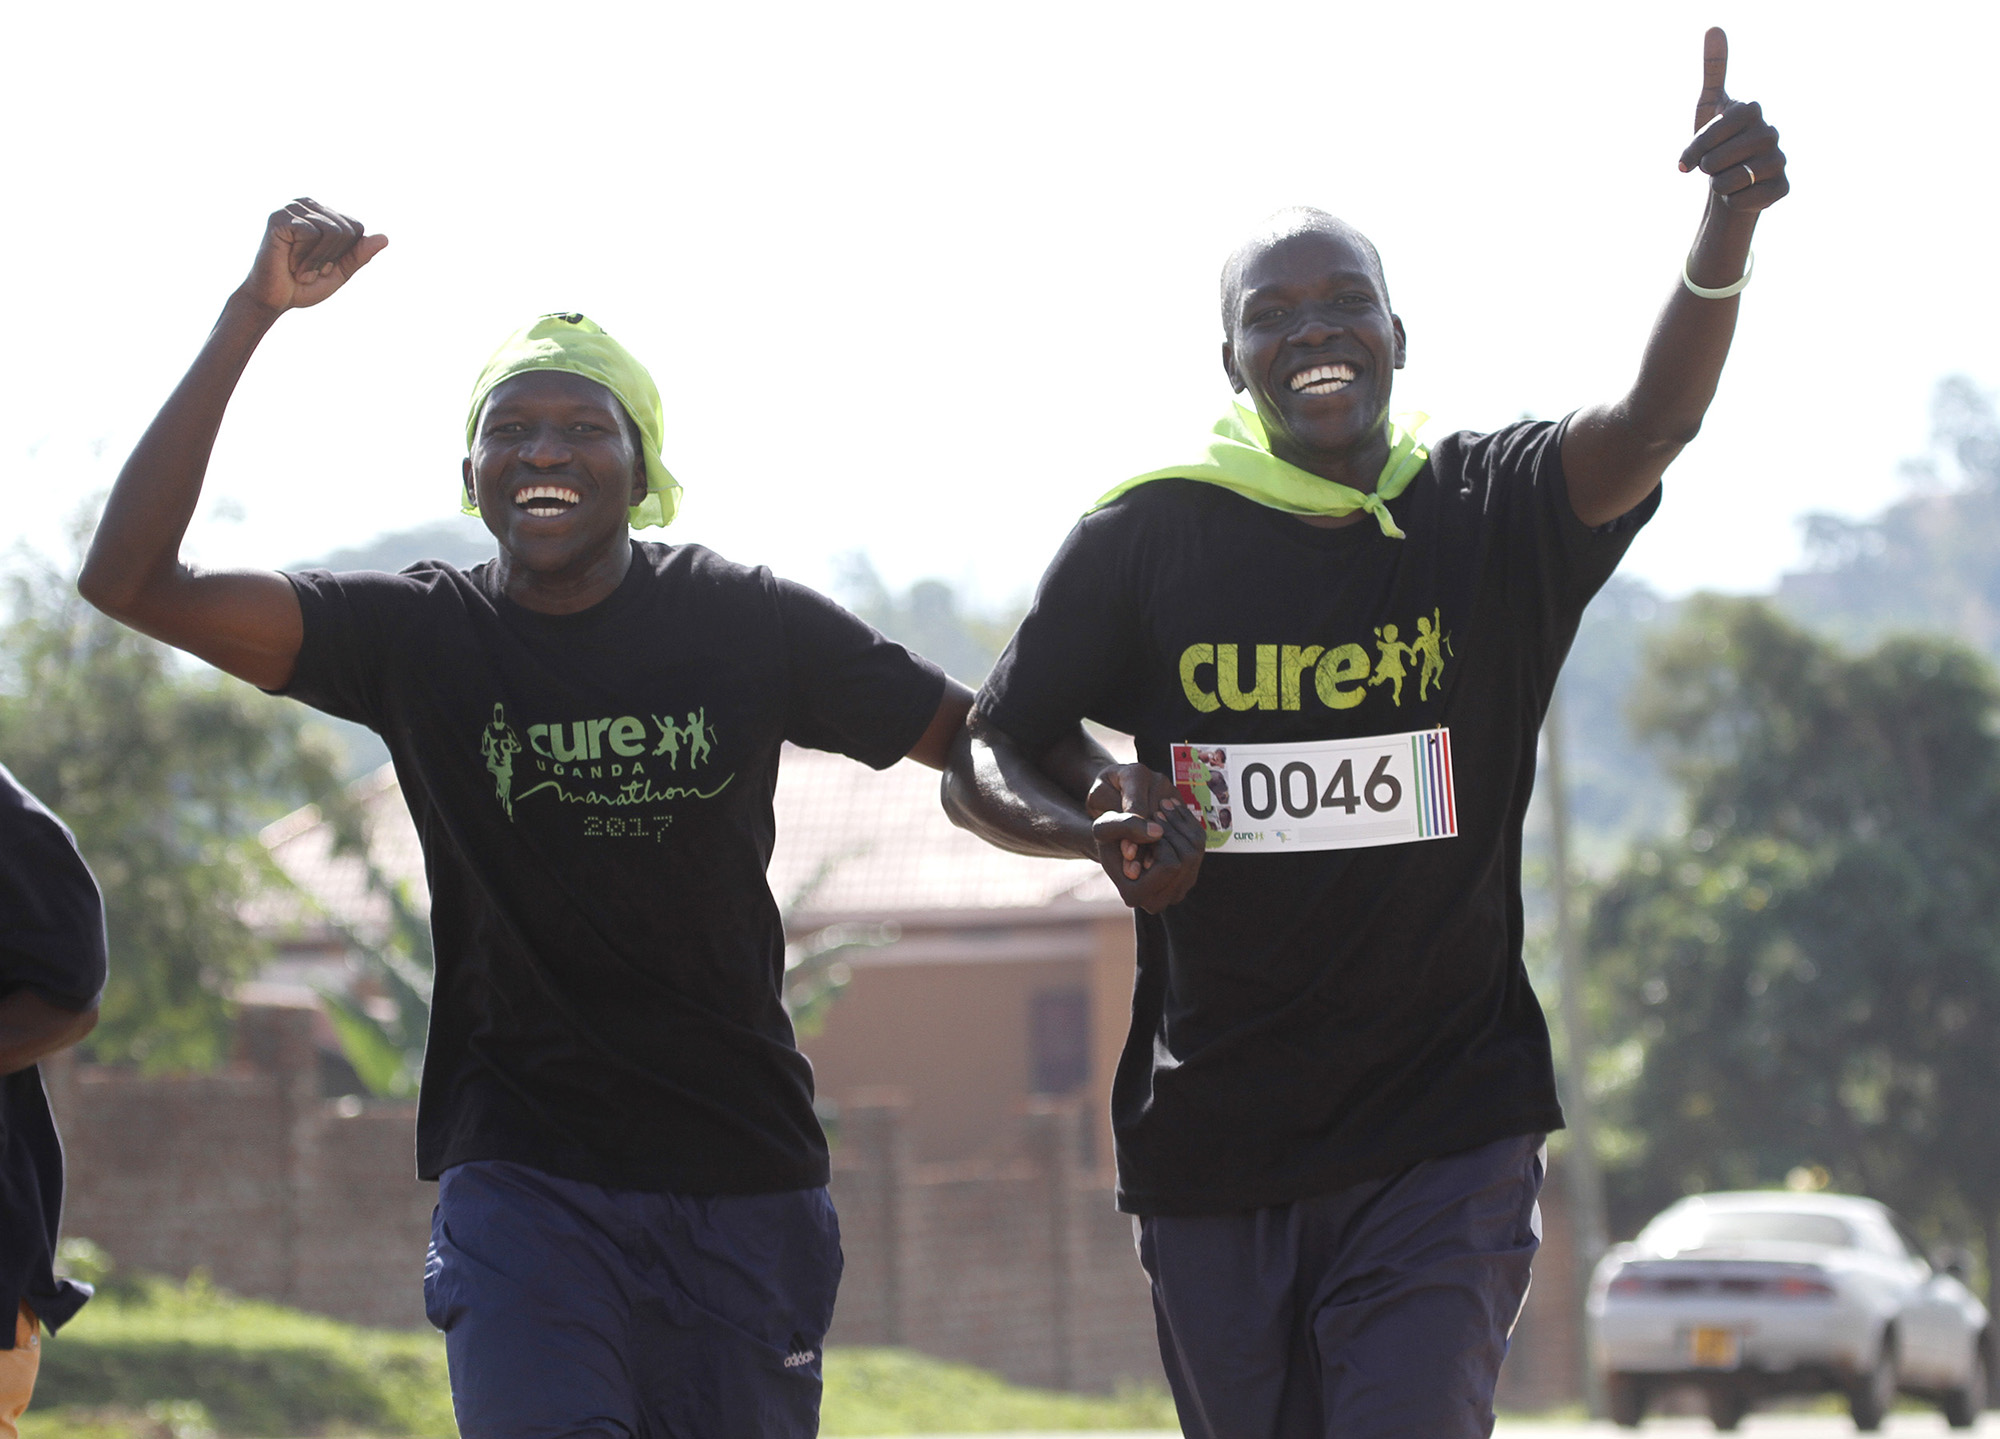 More Than 250 Participate in 10K to Benefit CURE Uganda